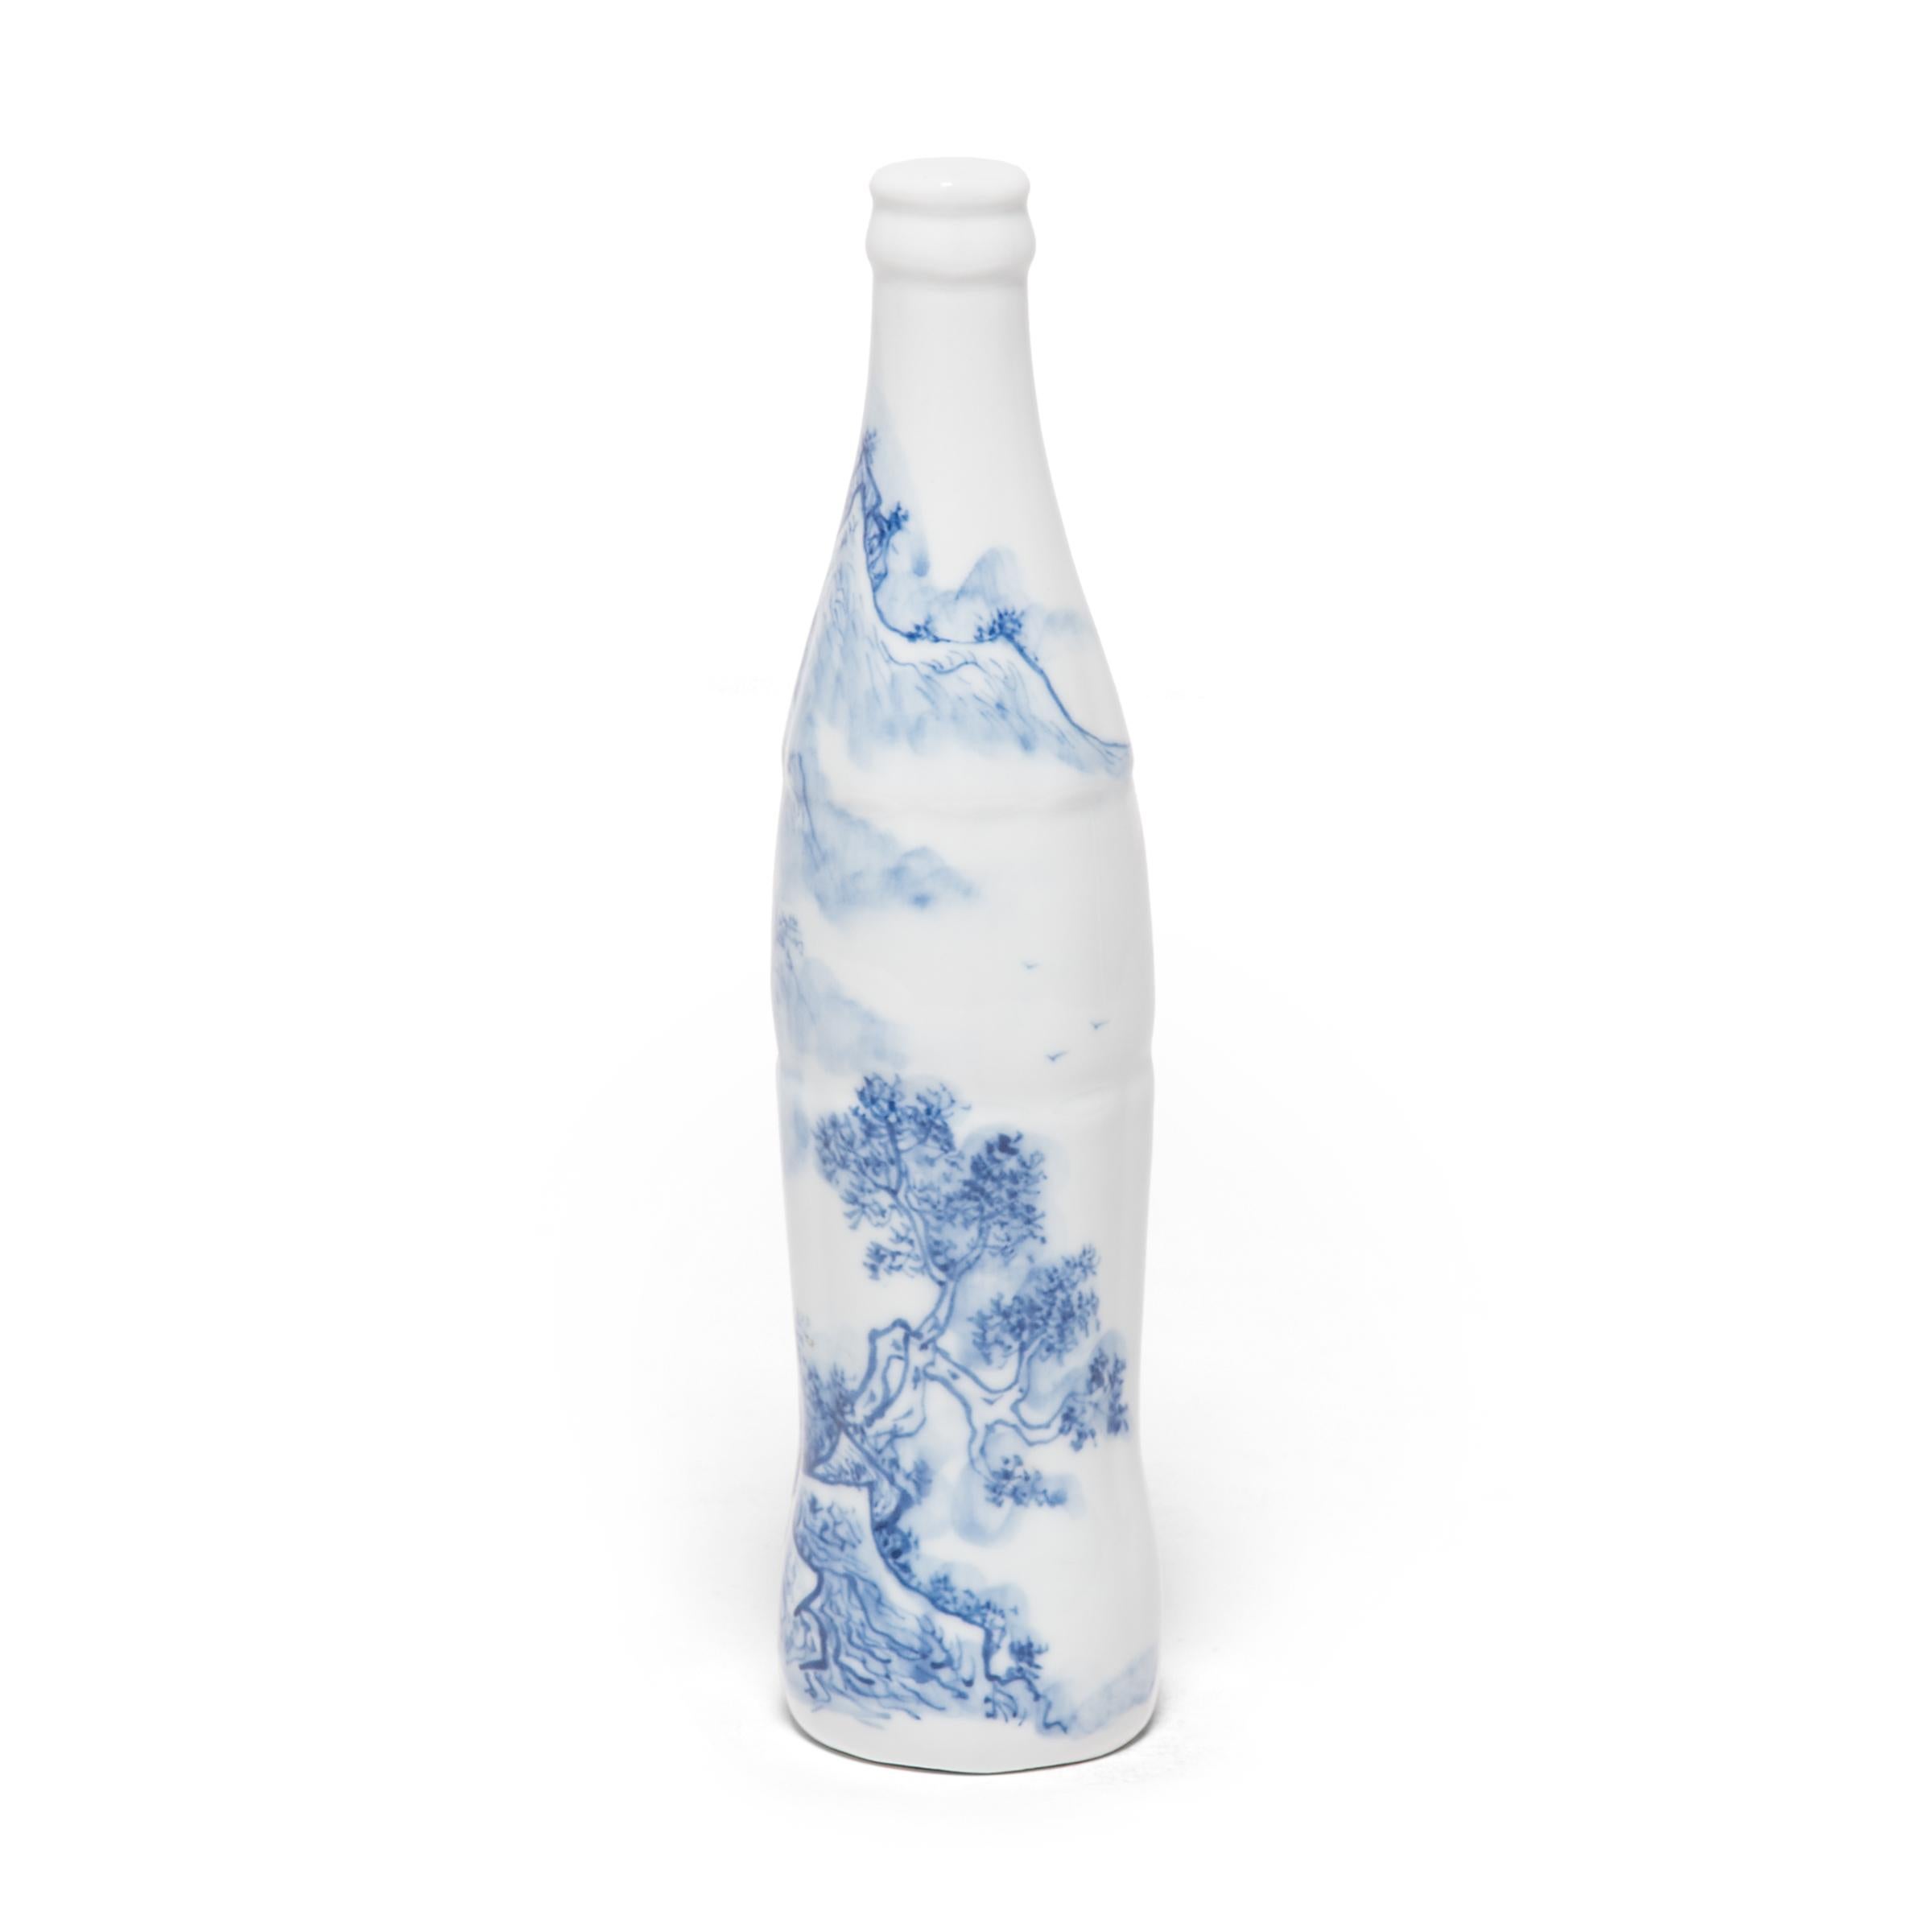 Created by artist Taikkun Li exclusively for Pagoda Red, this limited edition hand painted cola bottle is one of a series drawing on the rich tradition of Chinese blue and white ceramics. Fired at the historic Chinese imperial kilns of Jingdezhen,